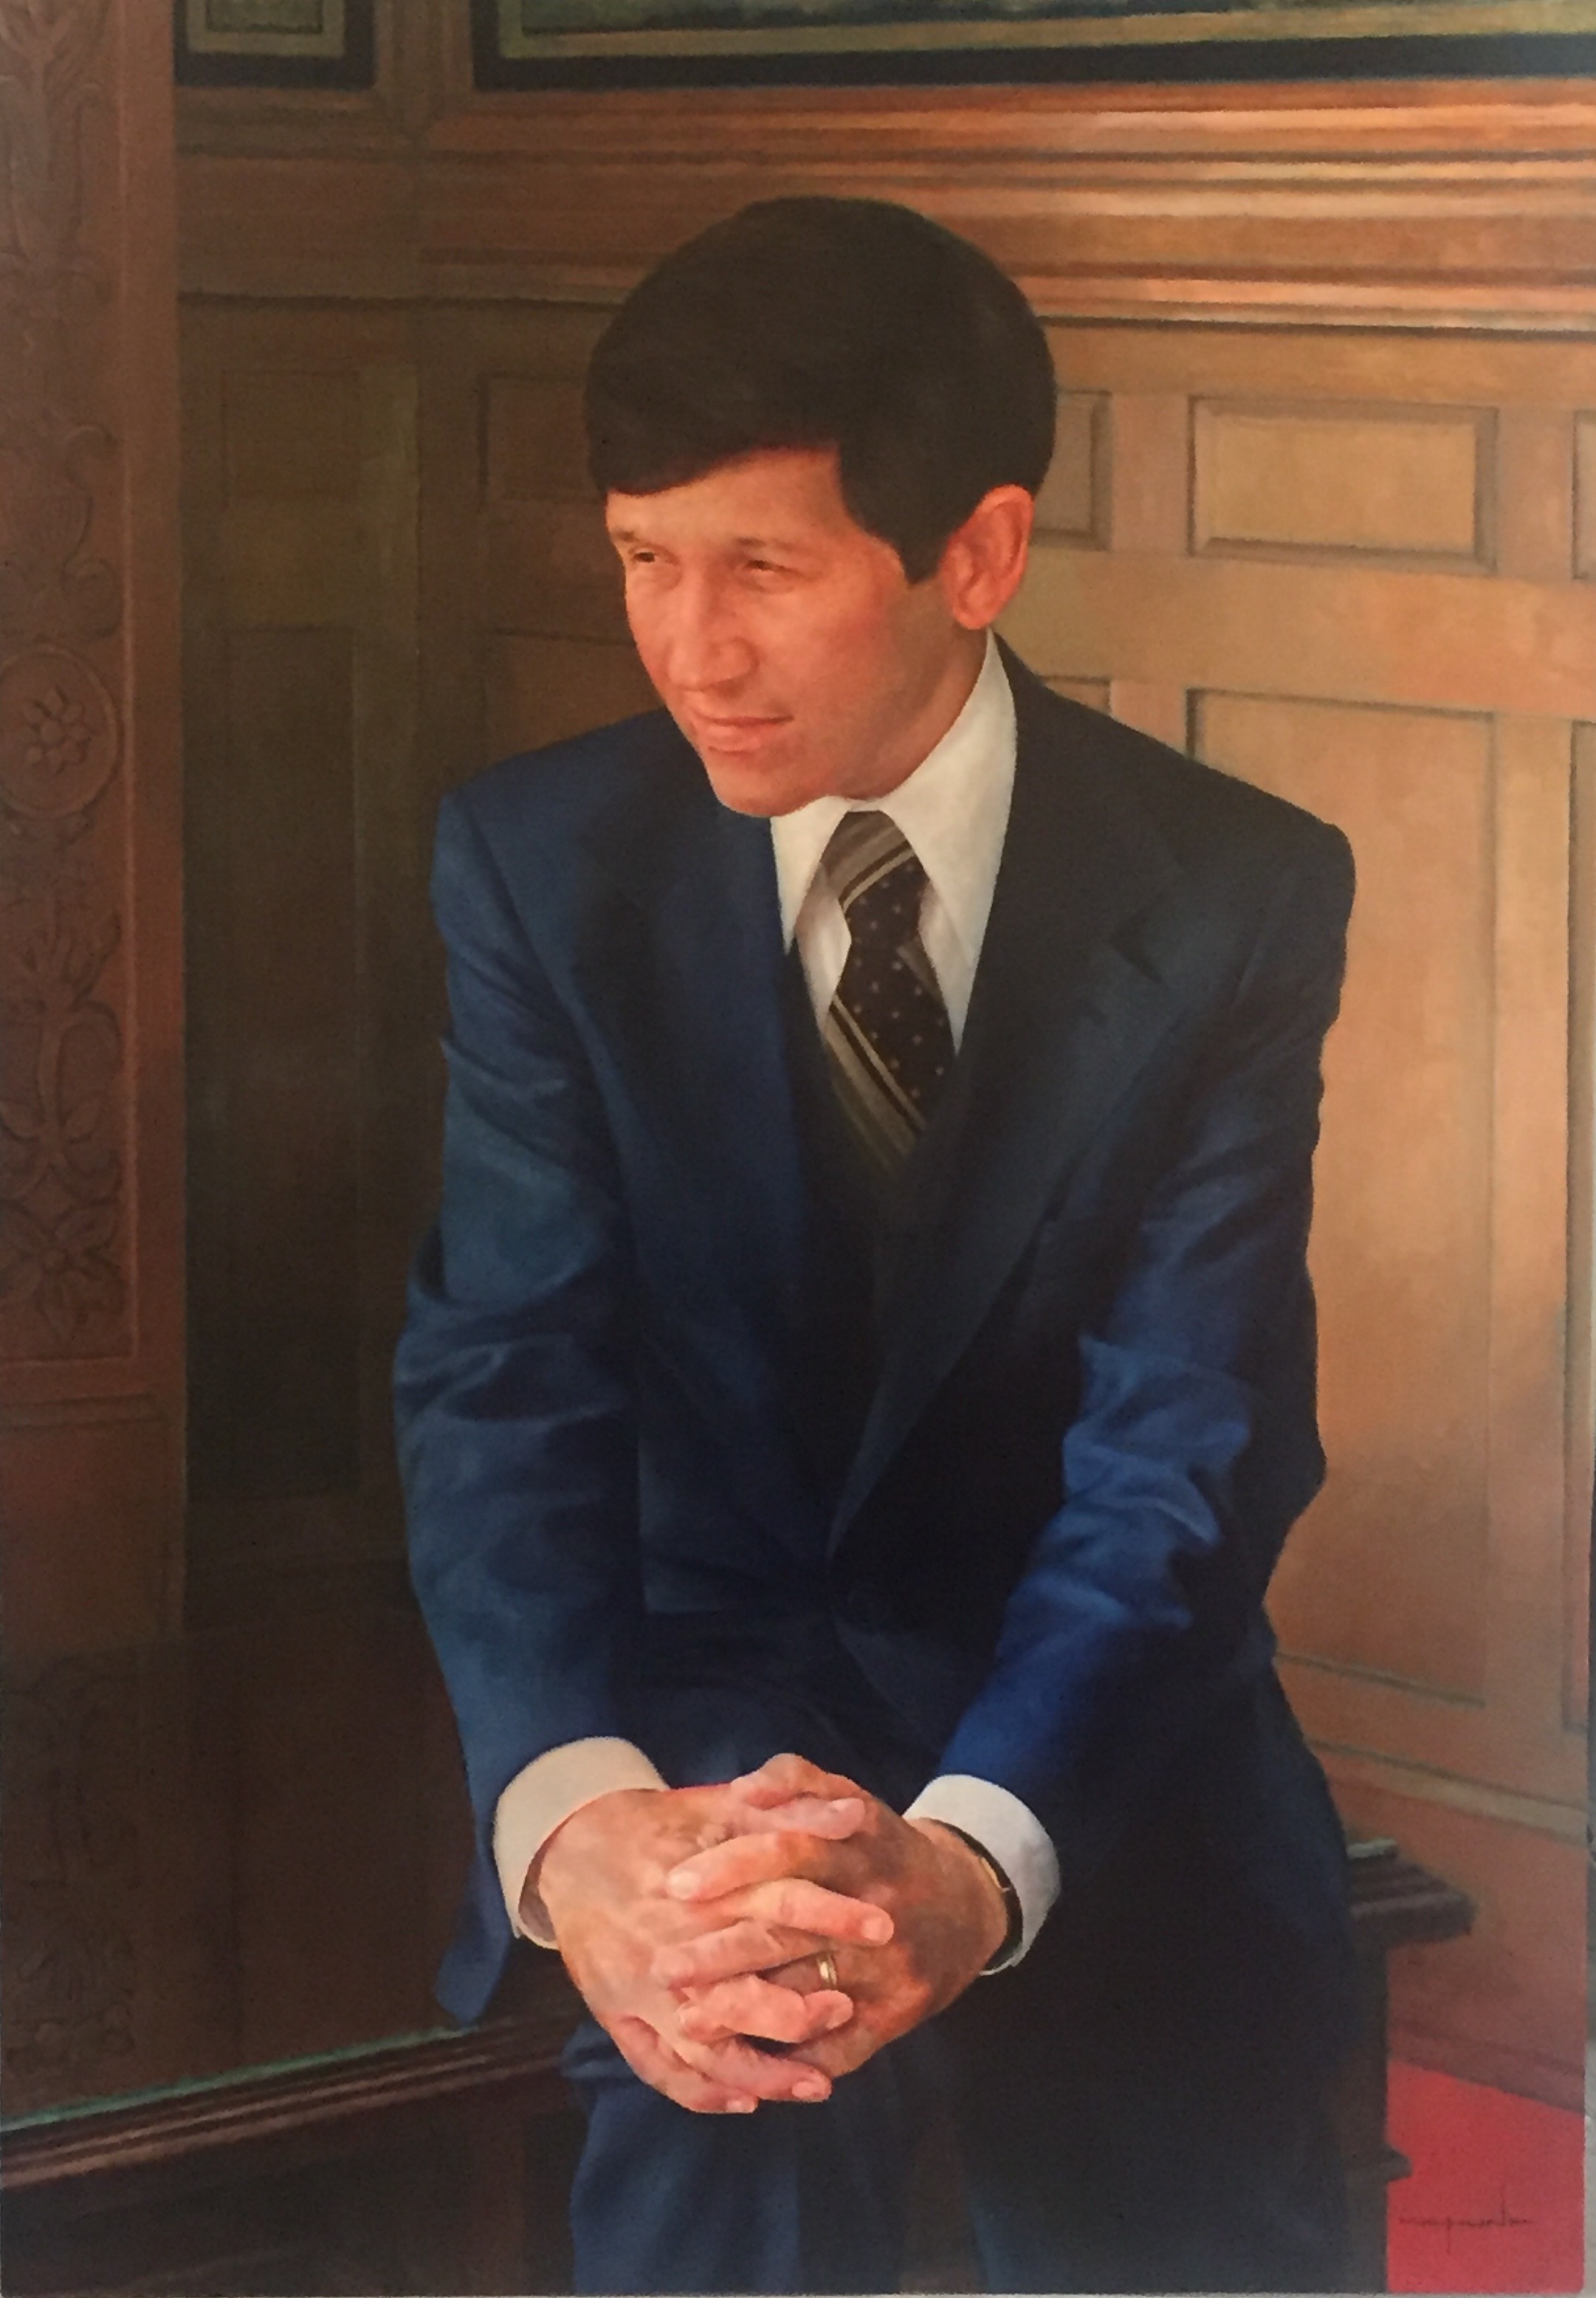 At Last, Completed Dennis Kucinich Mayoral Portrait Could Be Installed at City Hall Cleveland News Cleveland Cleveland Scene image